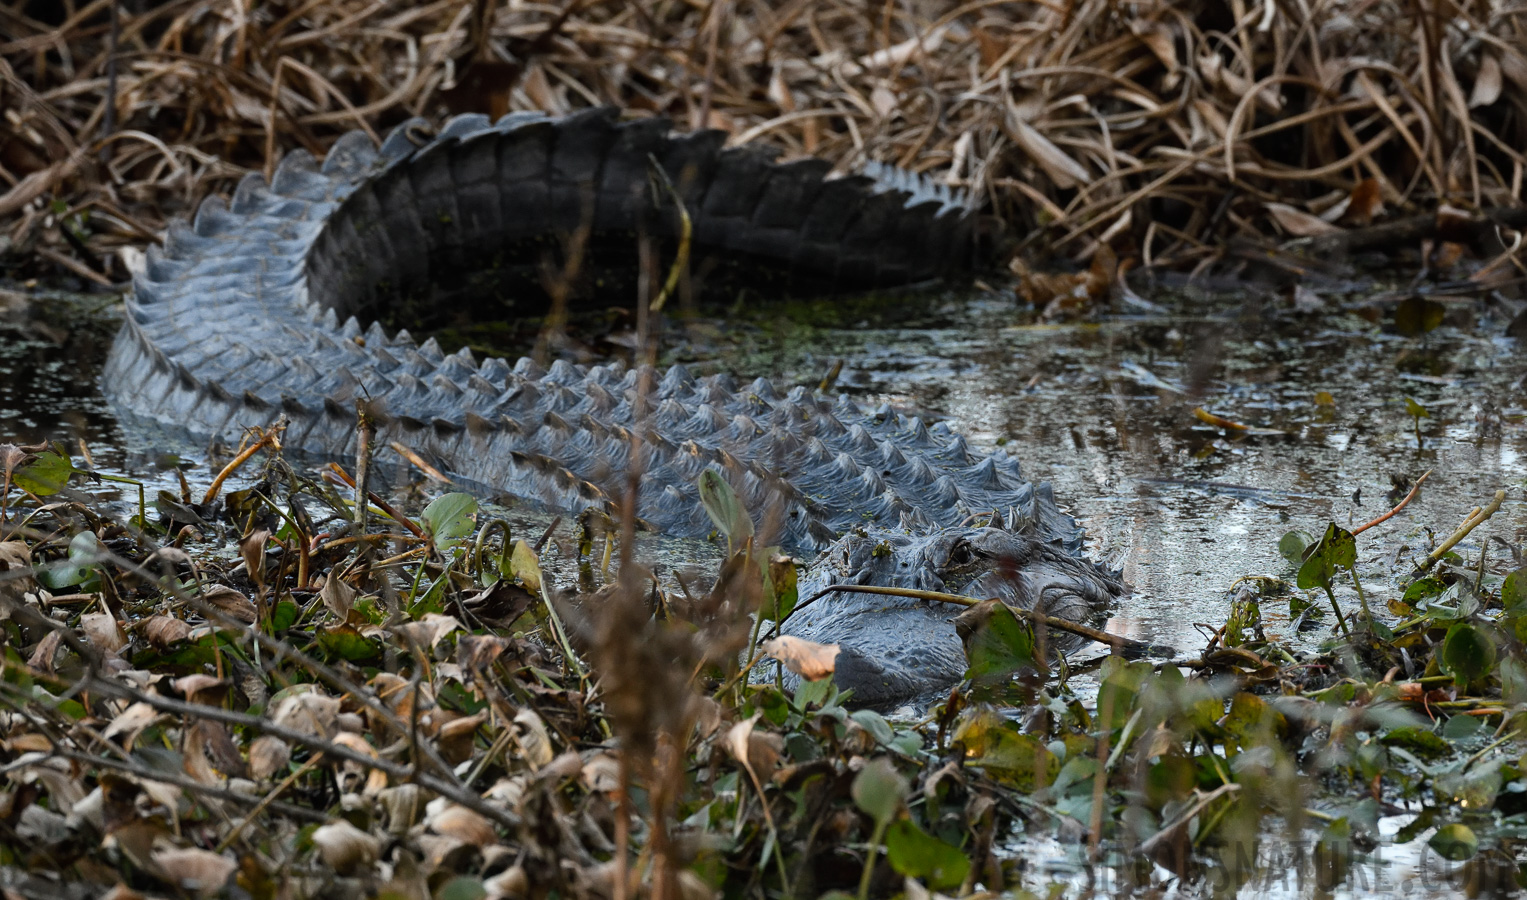 Alligator mississippiensis [400 mm, 1/320 sec at f / 8.0, ISO 2500]